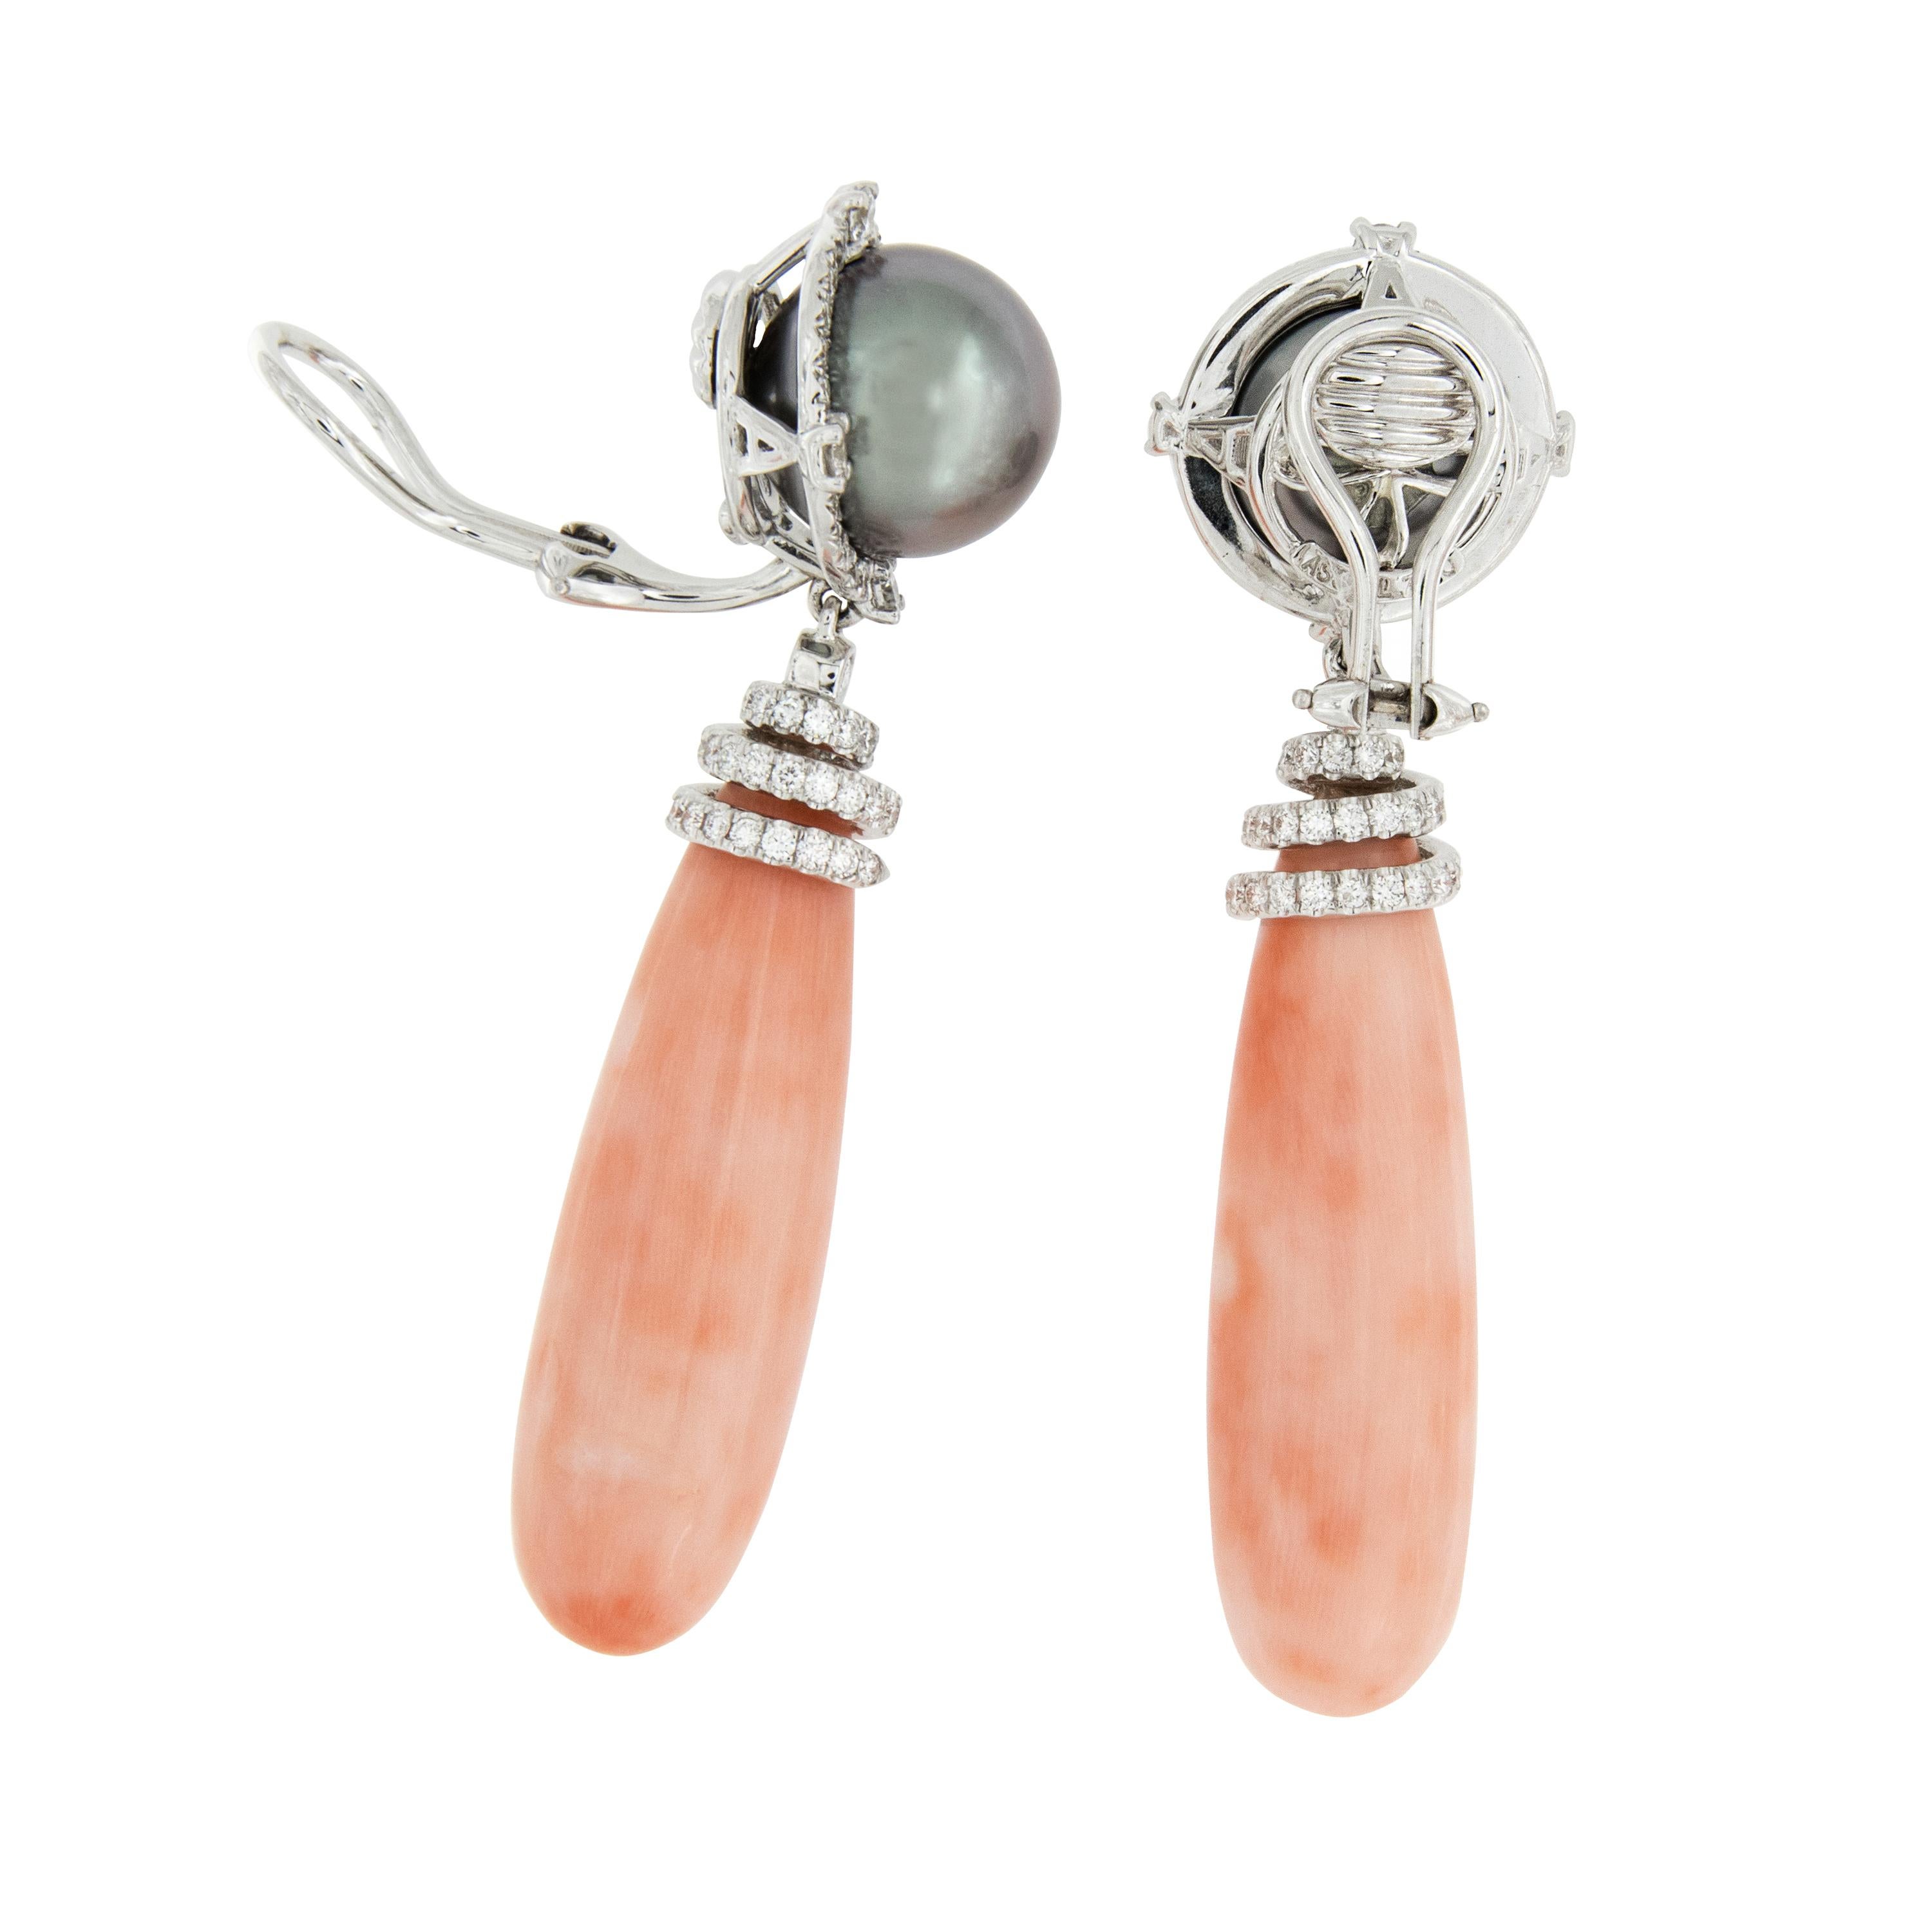 Natural Angel Skin Coral belongs in a rarefied circle of extraordinary gems. This precious coral of Japanese origin is beyond rare and has been virtually unavailable for decades. Now is your time to own something so rare! These lovely earrings have